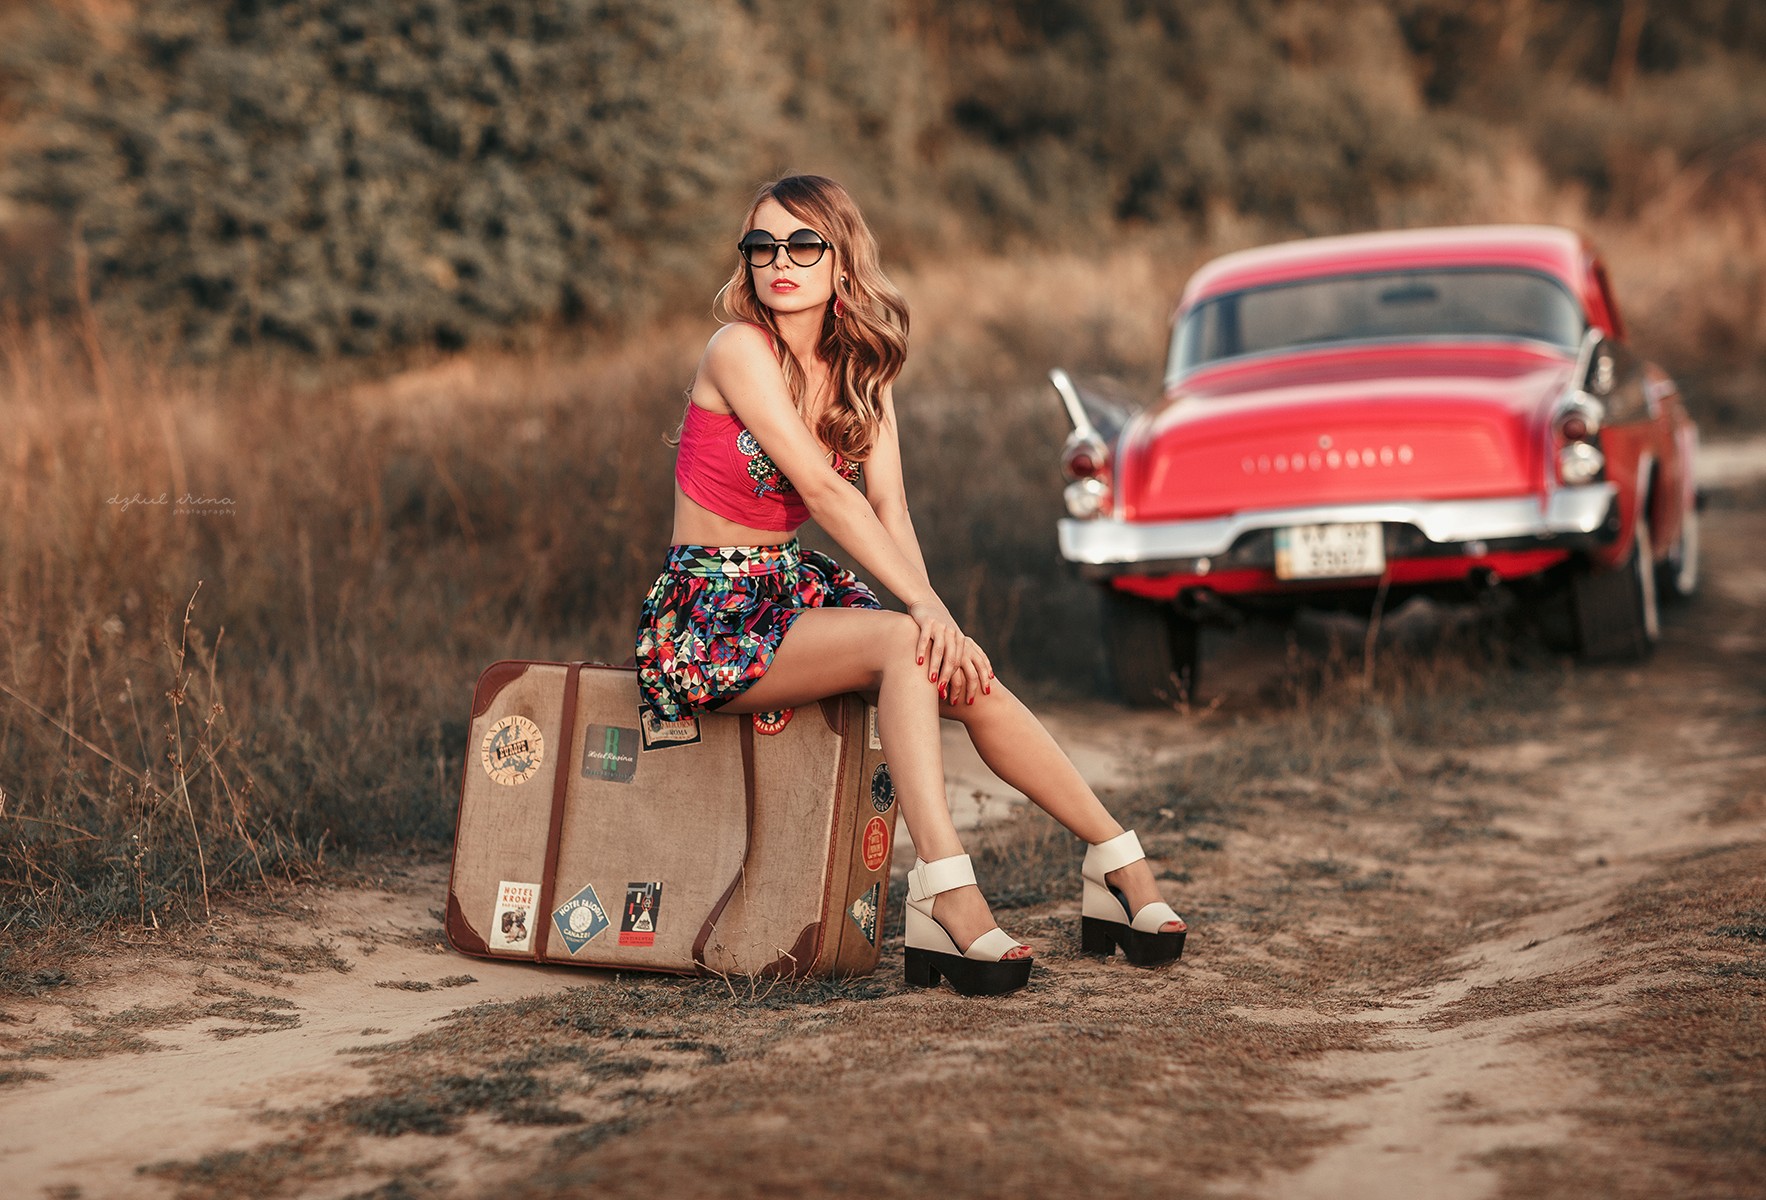 People 1766x1200 women with cars women Irina Dzhul miniskirt crop top women outdoors women with shades brunette painted nails red lipstick sitting red cars hands on knees car vehicle sunglasses red nails